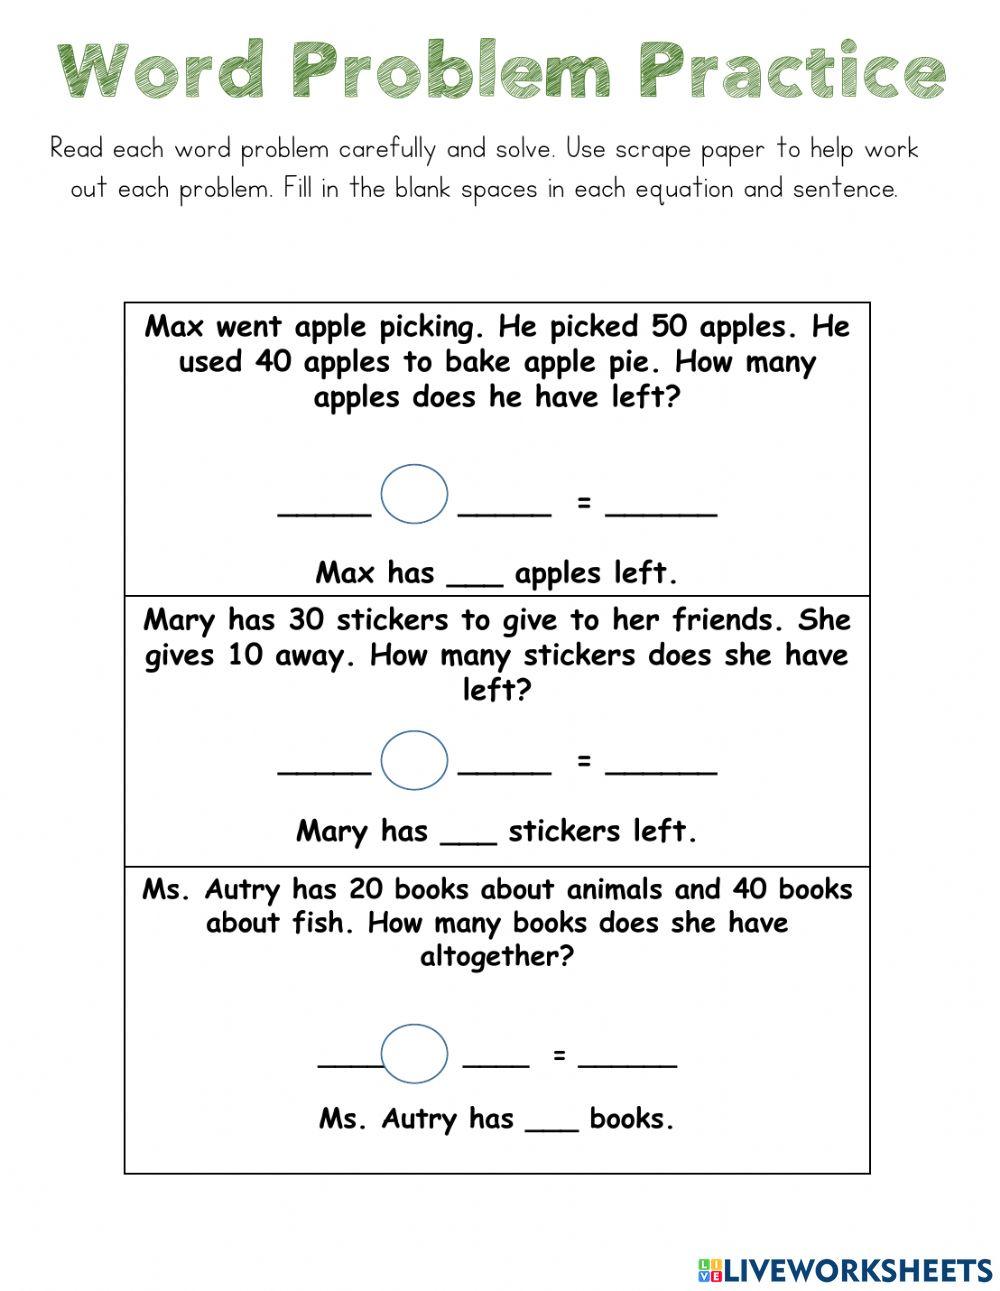 Word Problems 3